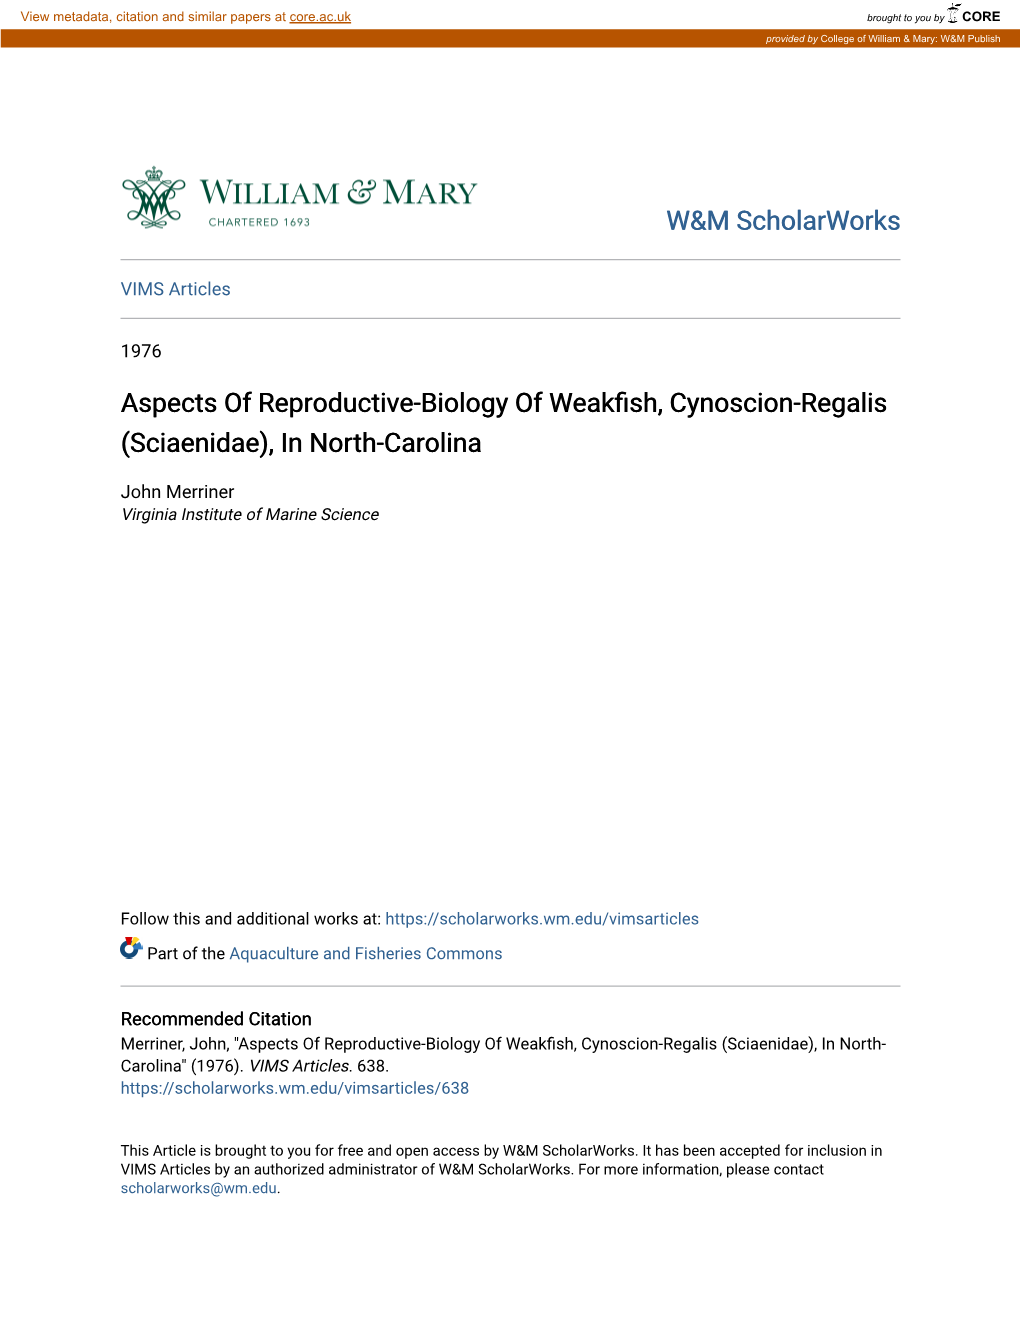 Aspects of Reproductive-Biology of Weakfish, Cynoscion-Regalis (Sciaenidae), in North-Carolina